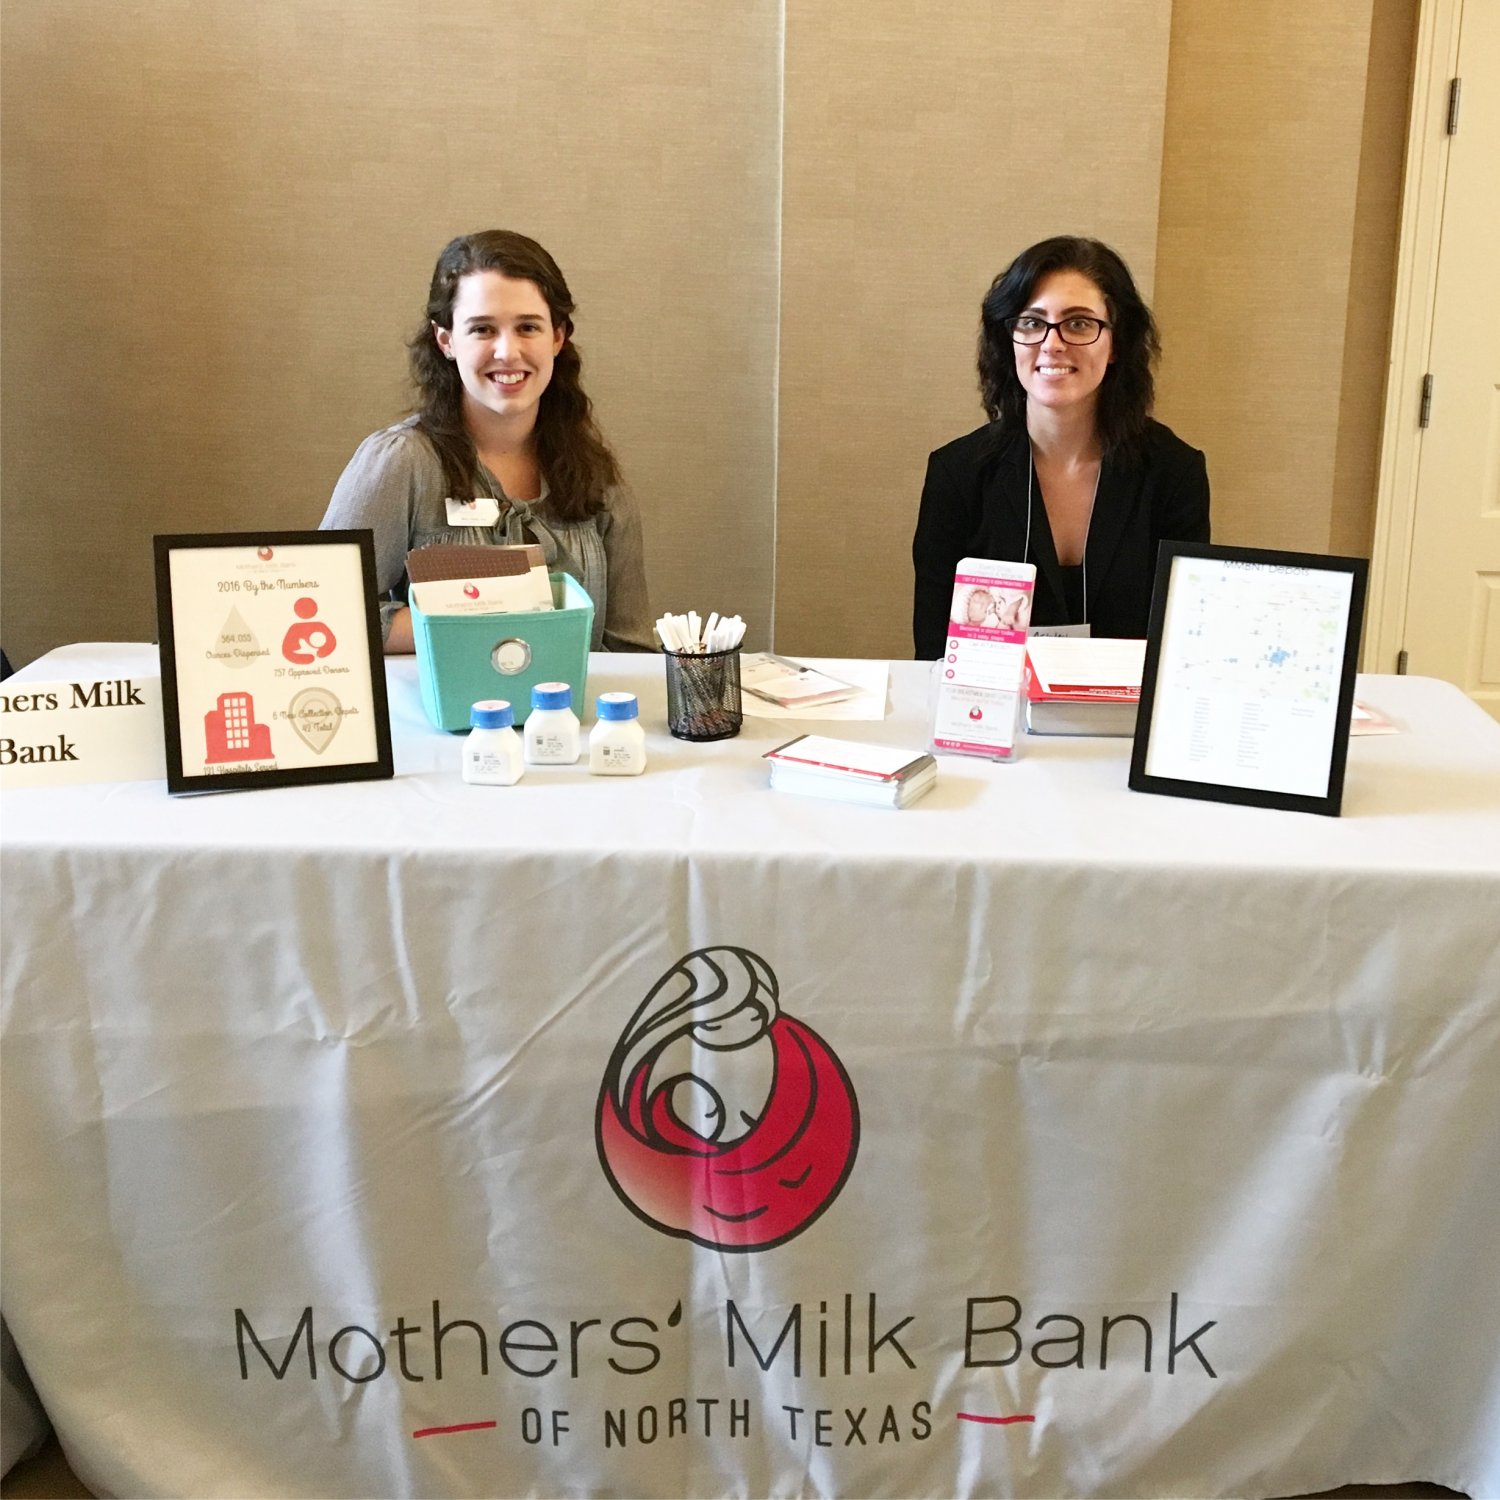 Milk bank staff sitting at informational table